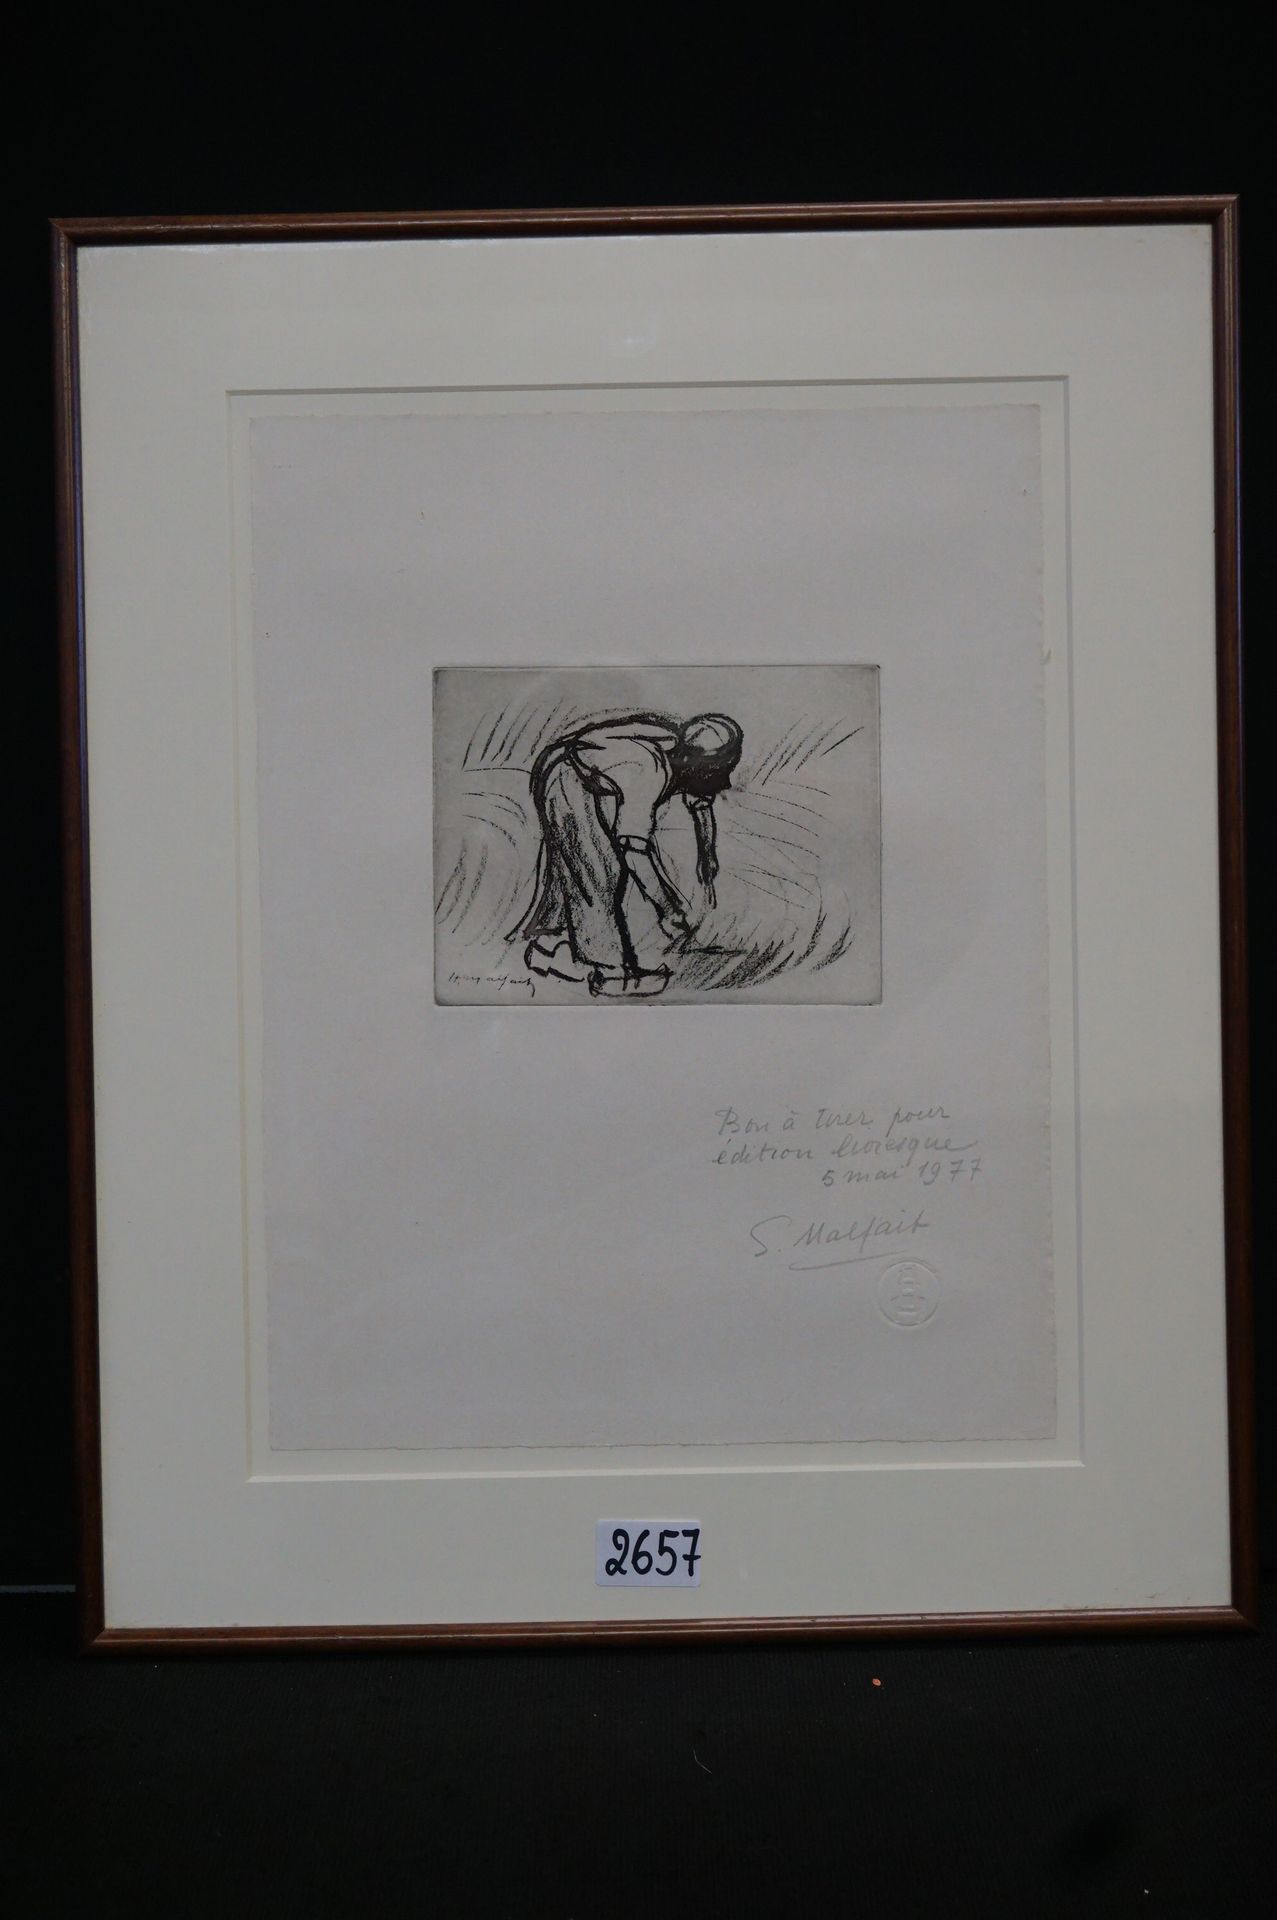 HUBERT MALFAIT (1898 - 1971) "The reaper" - Etching - Signed in pencil - "BON A &hellip;